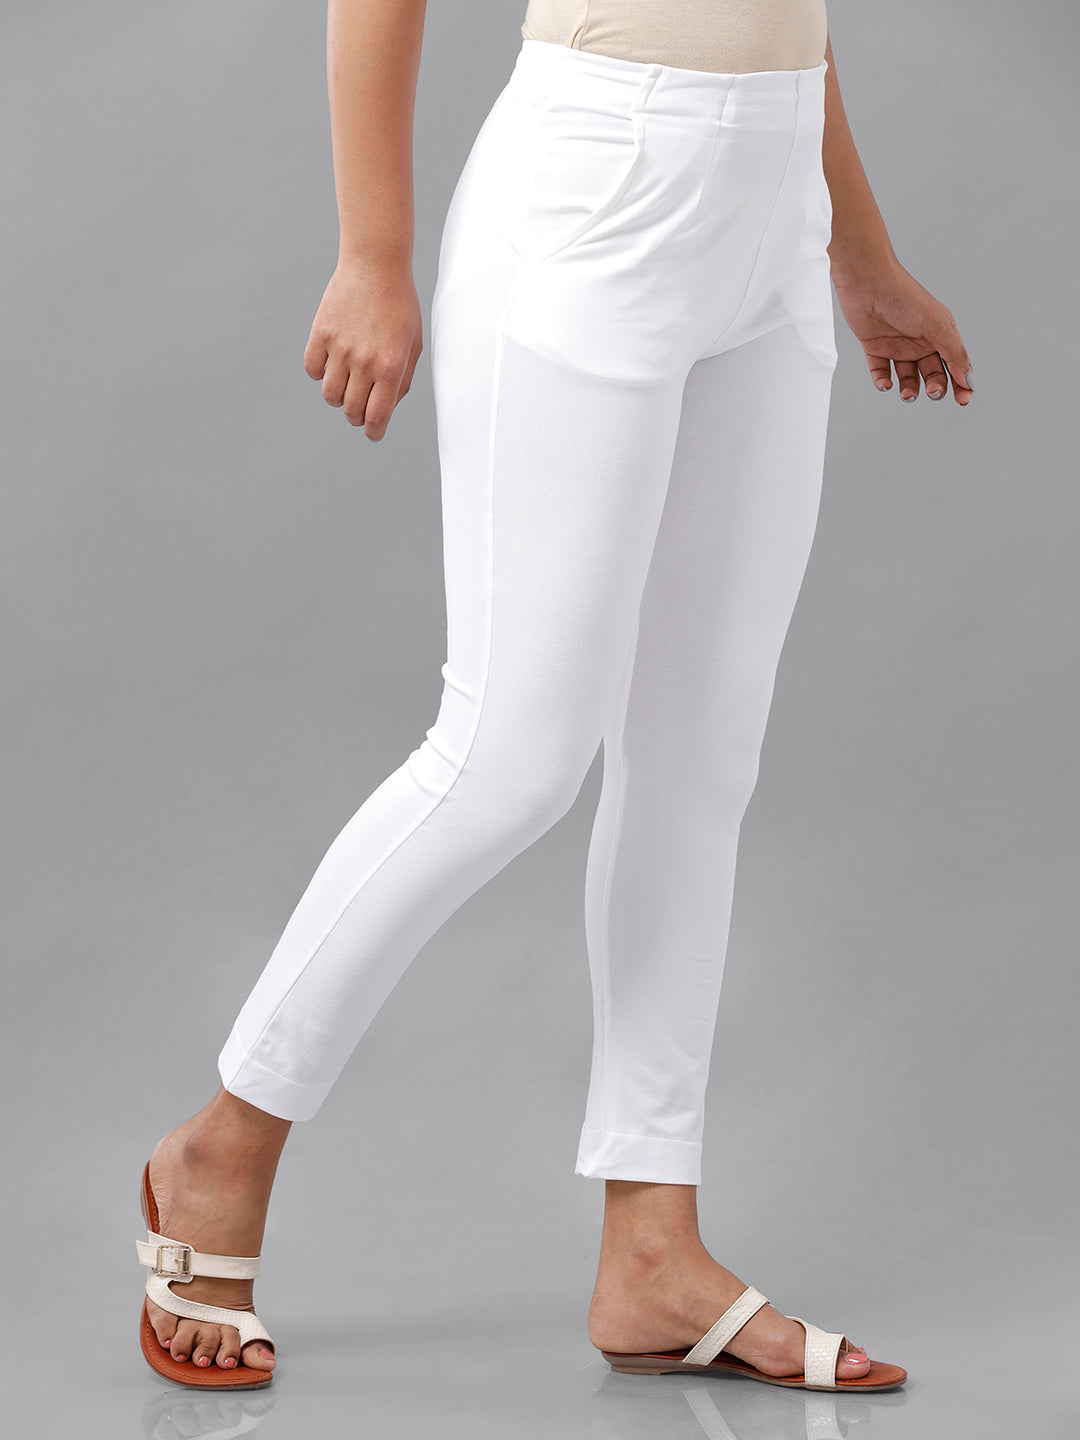 UNIQLO Ezy Ankle Pants in White, Women's Fashion, Bottoms, Other Bottoms on  Carousell